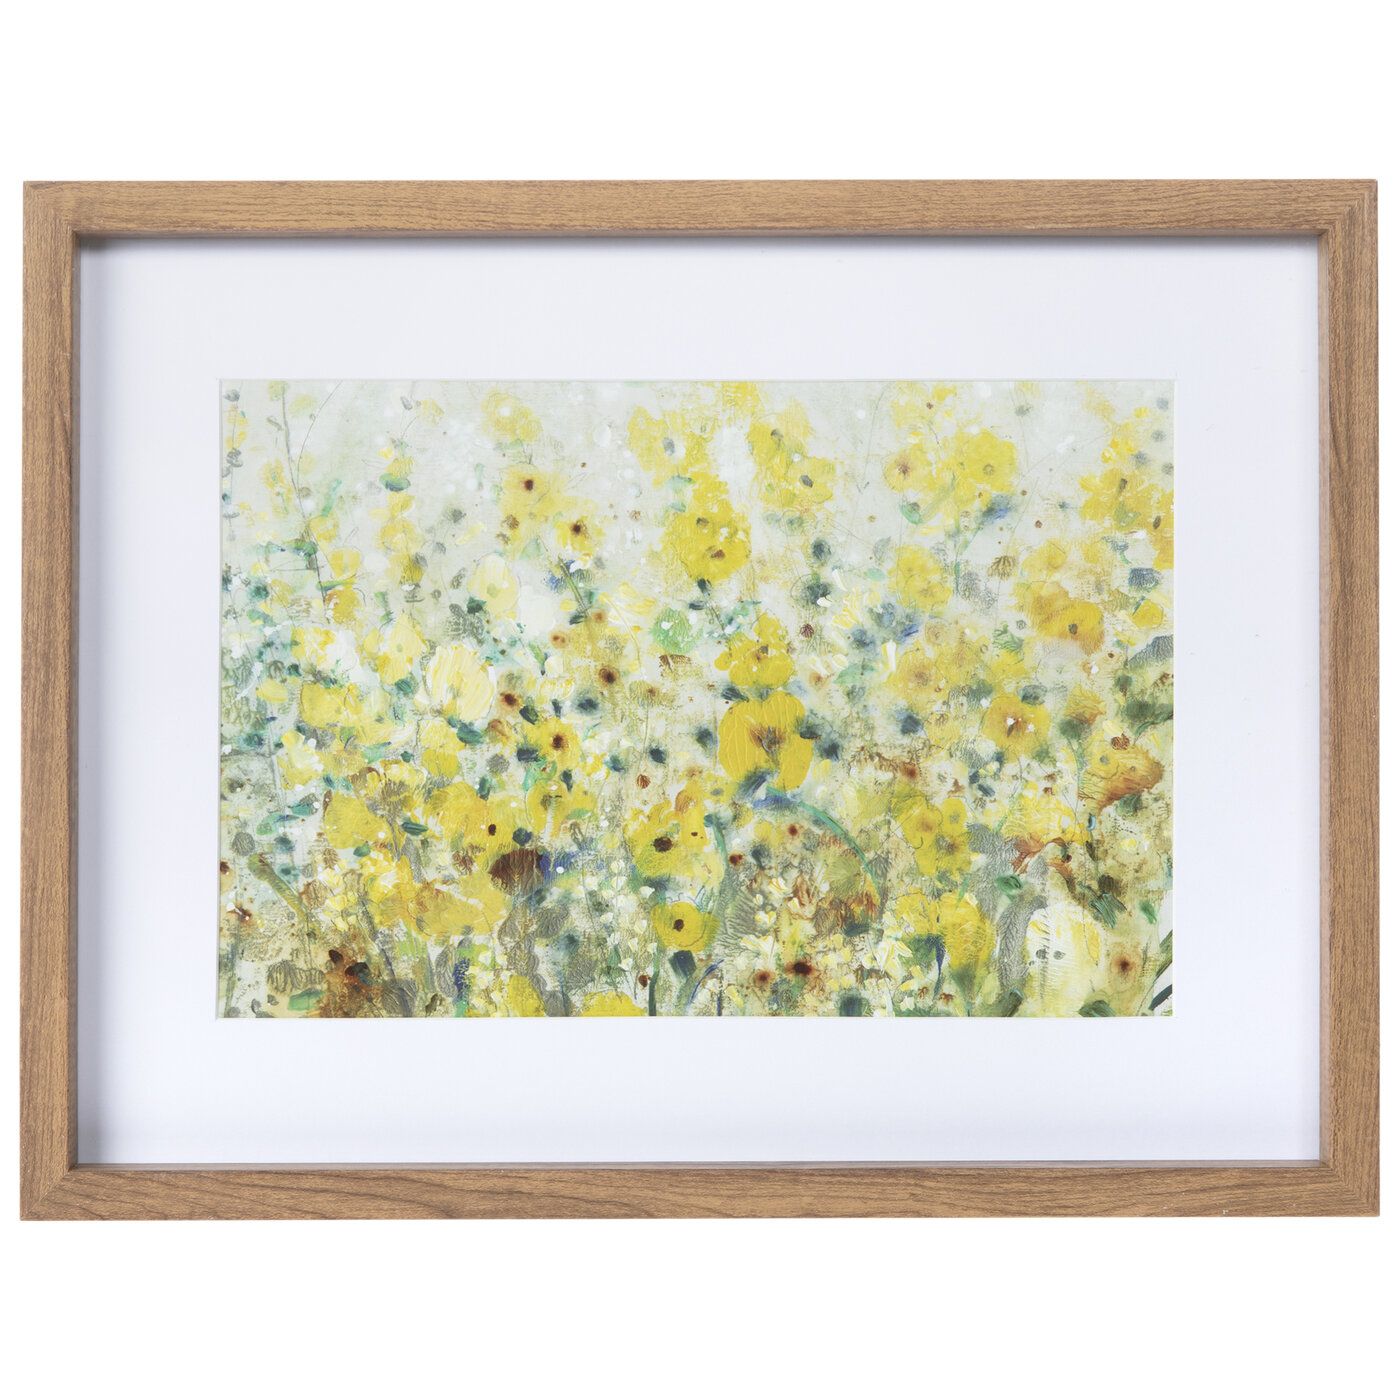 Yellow Flower Garden Framed Wall Decor | Hobby Lobby | 5671466 Intended For Most Up To Date Flower Garden Wall Art (View 18 of 20)